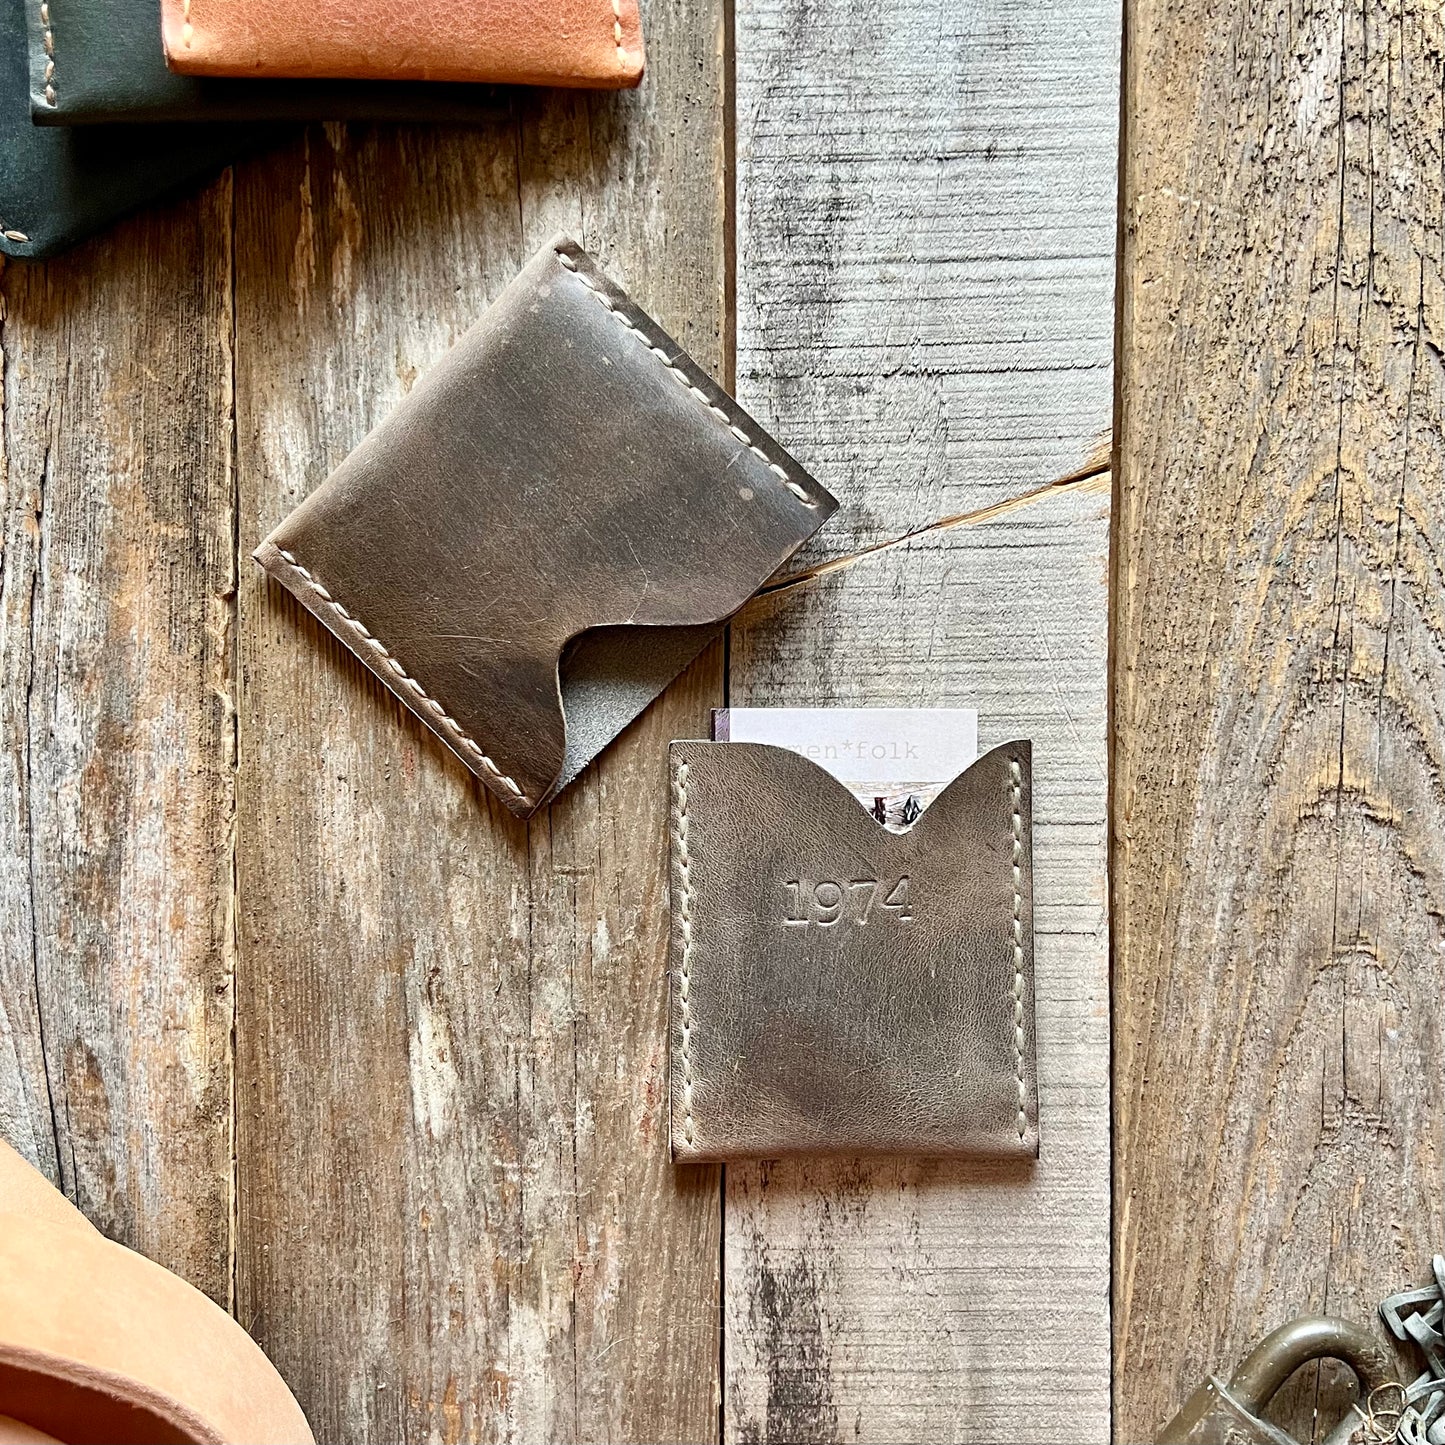 1974 Lucas Leather Wallet in Smoke (RTS)